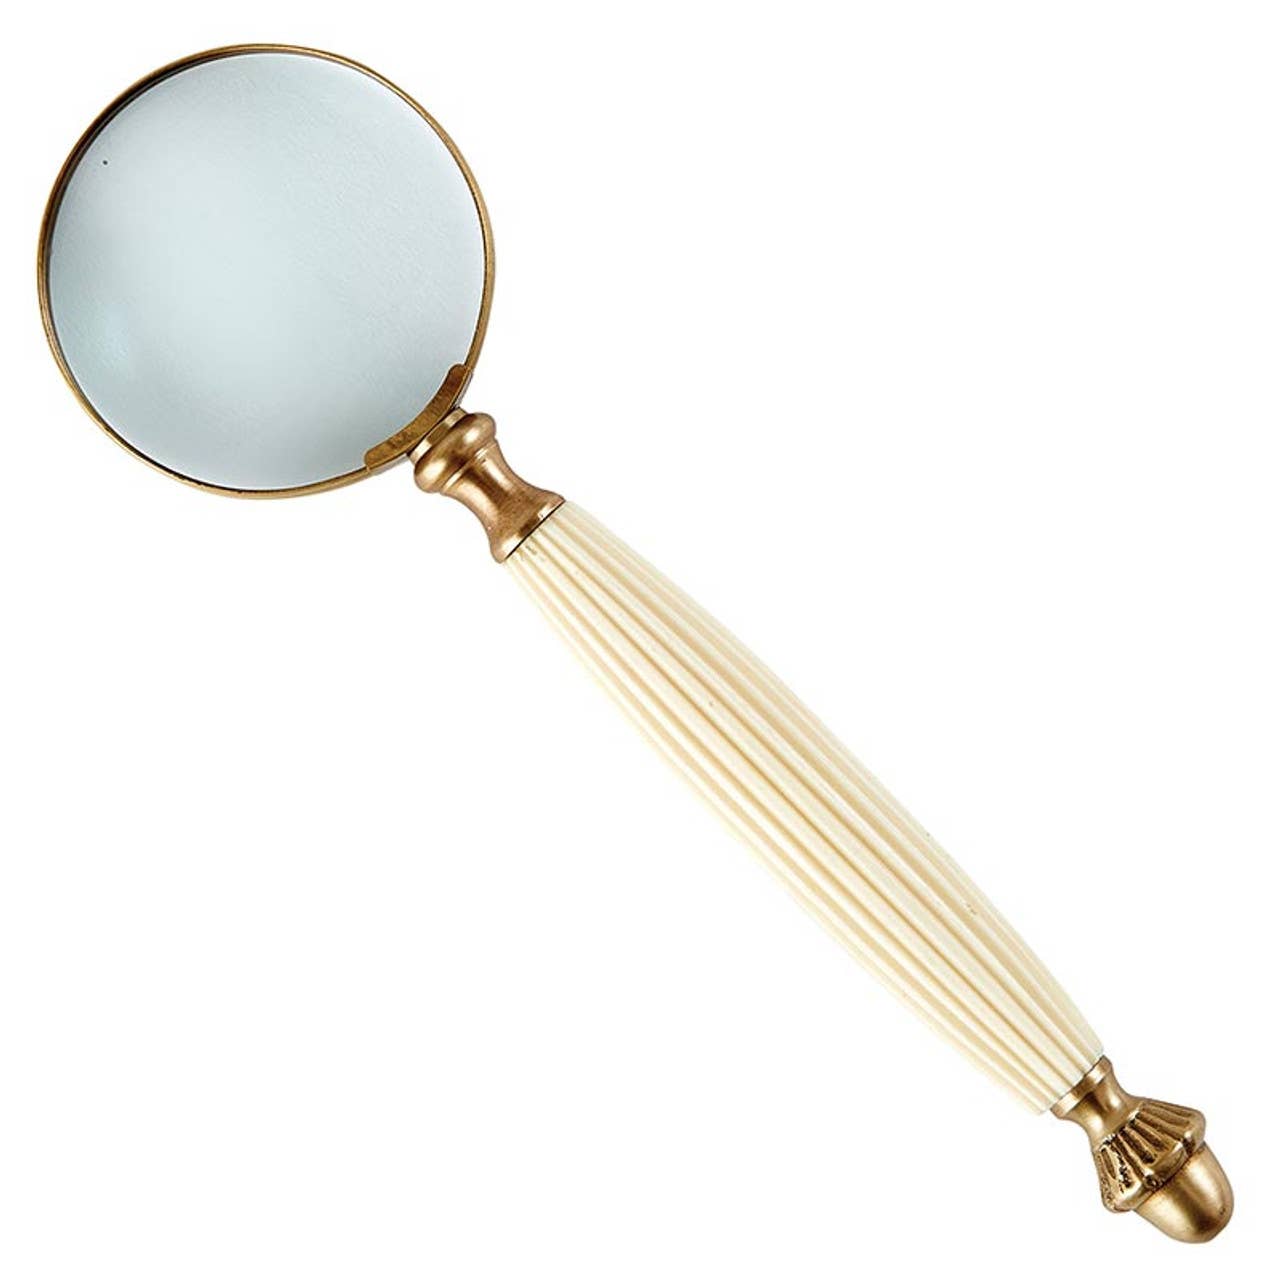 Ivory & Gold Magnifying Glass